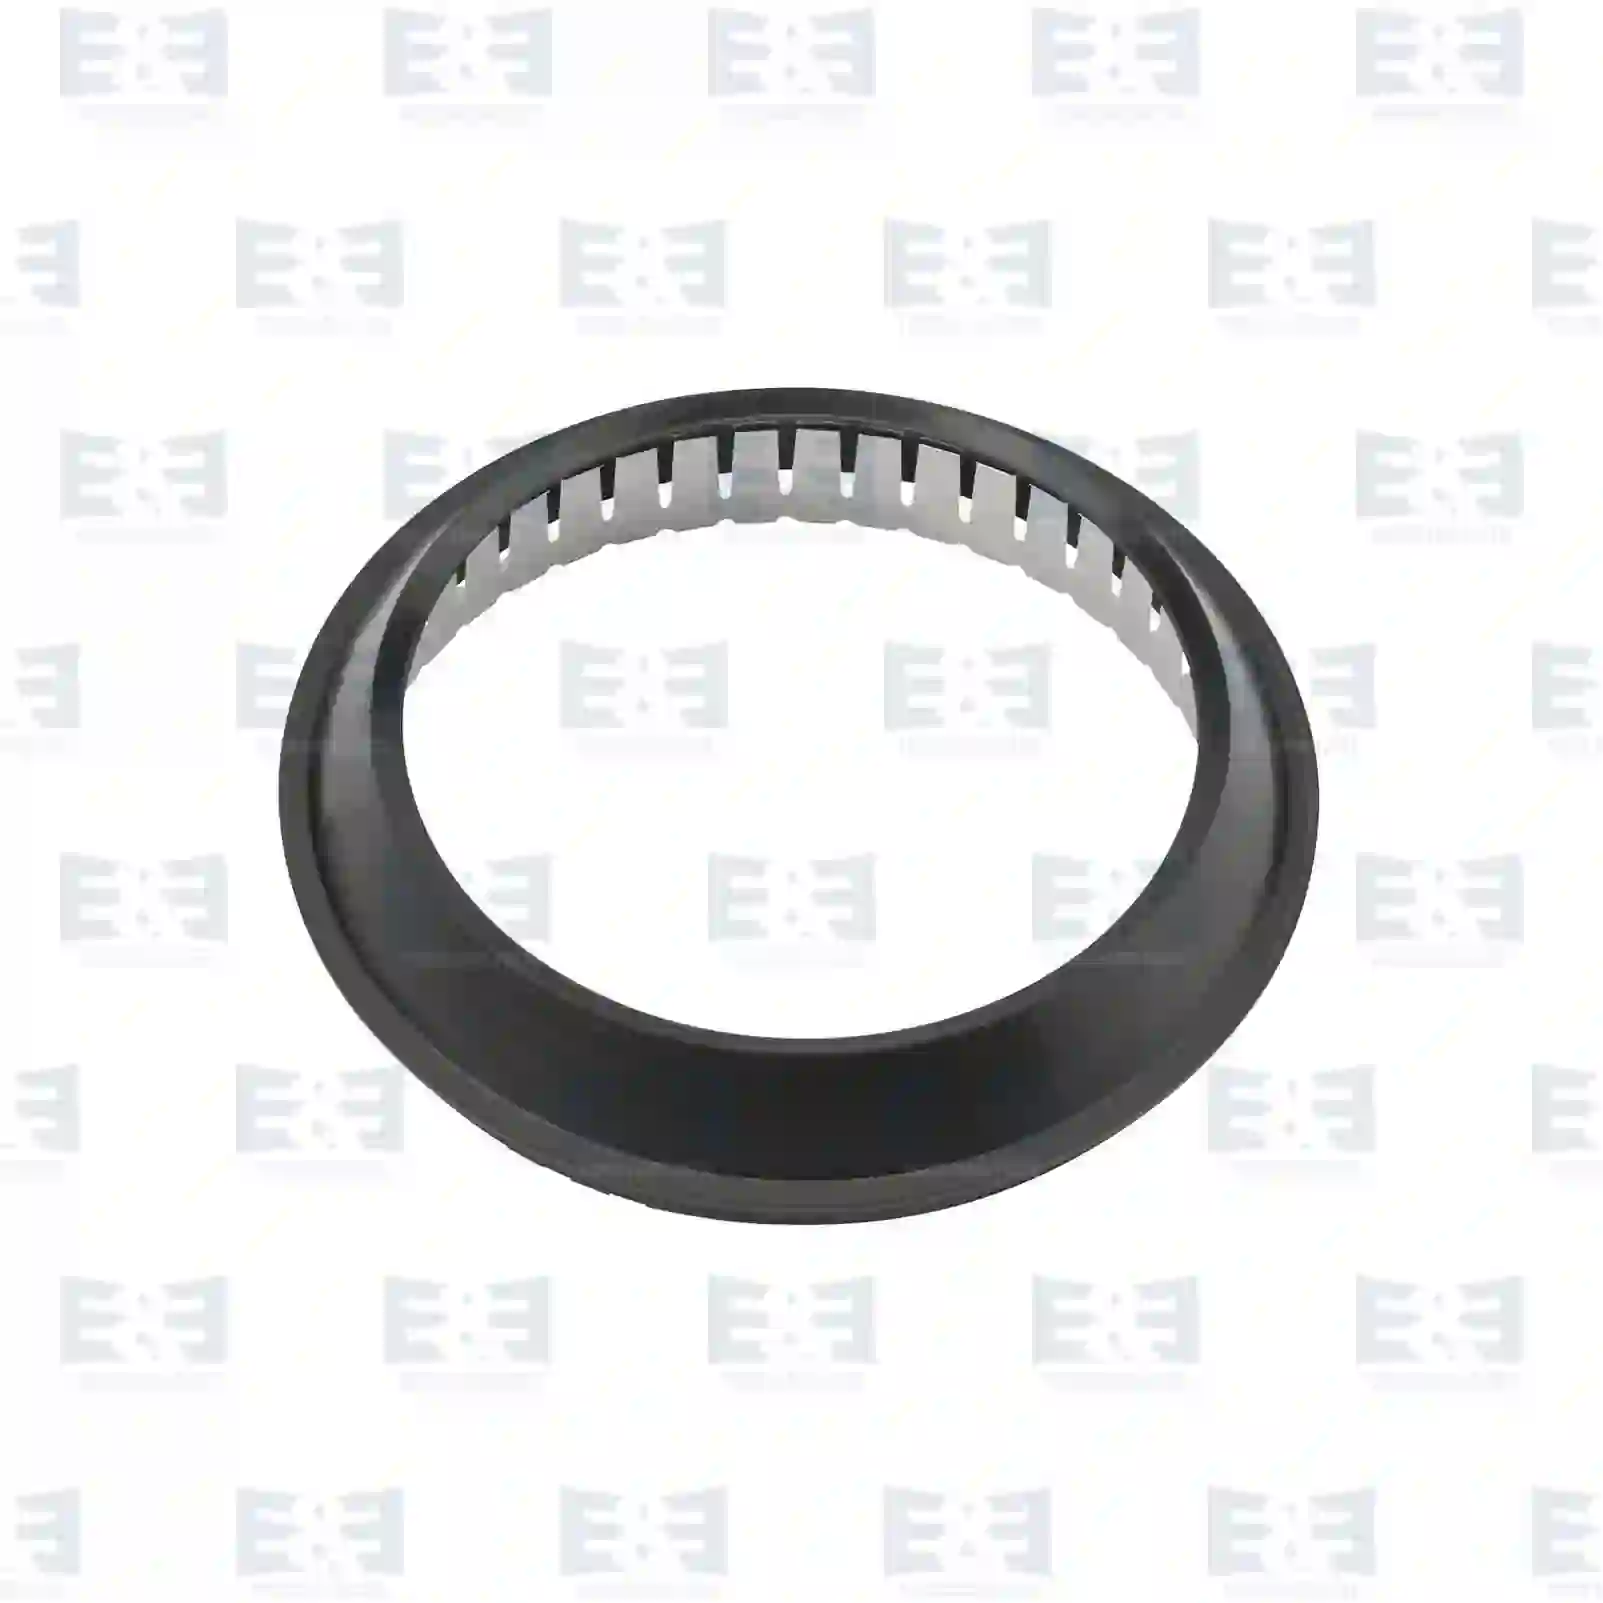  Lock ring, nut || E&E Truck Spare Parts | Truck Spare Parts, Auotomotive Spare Parts